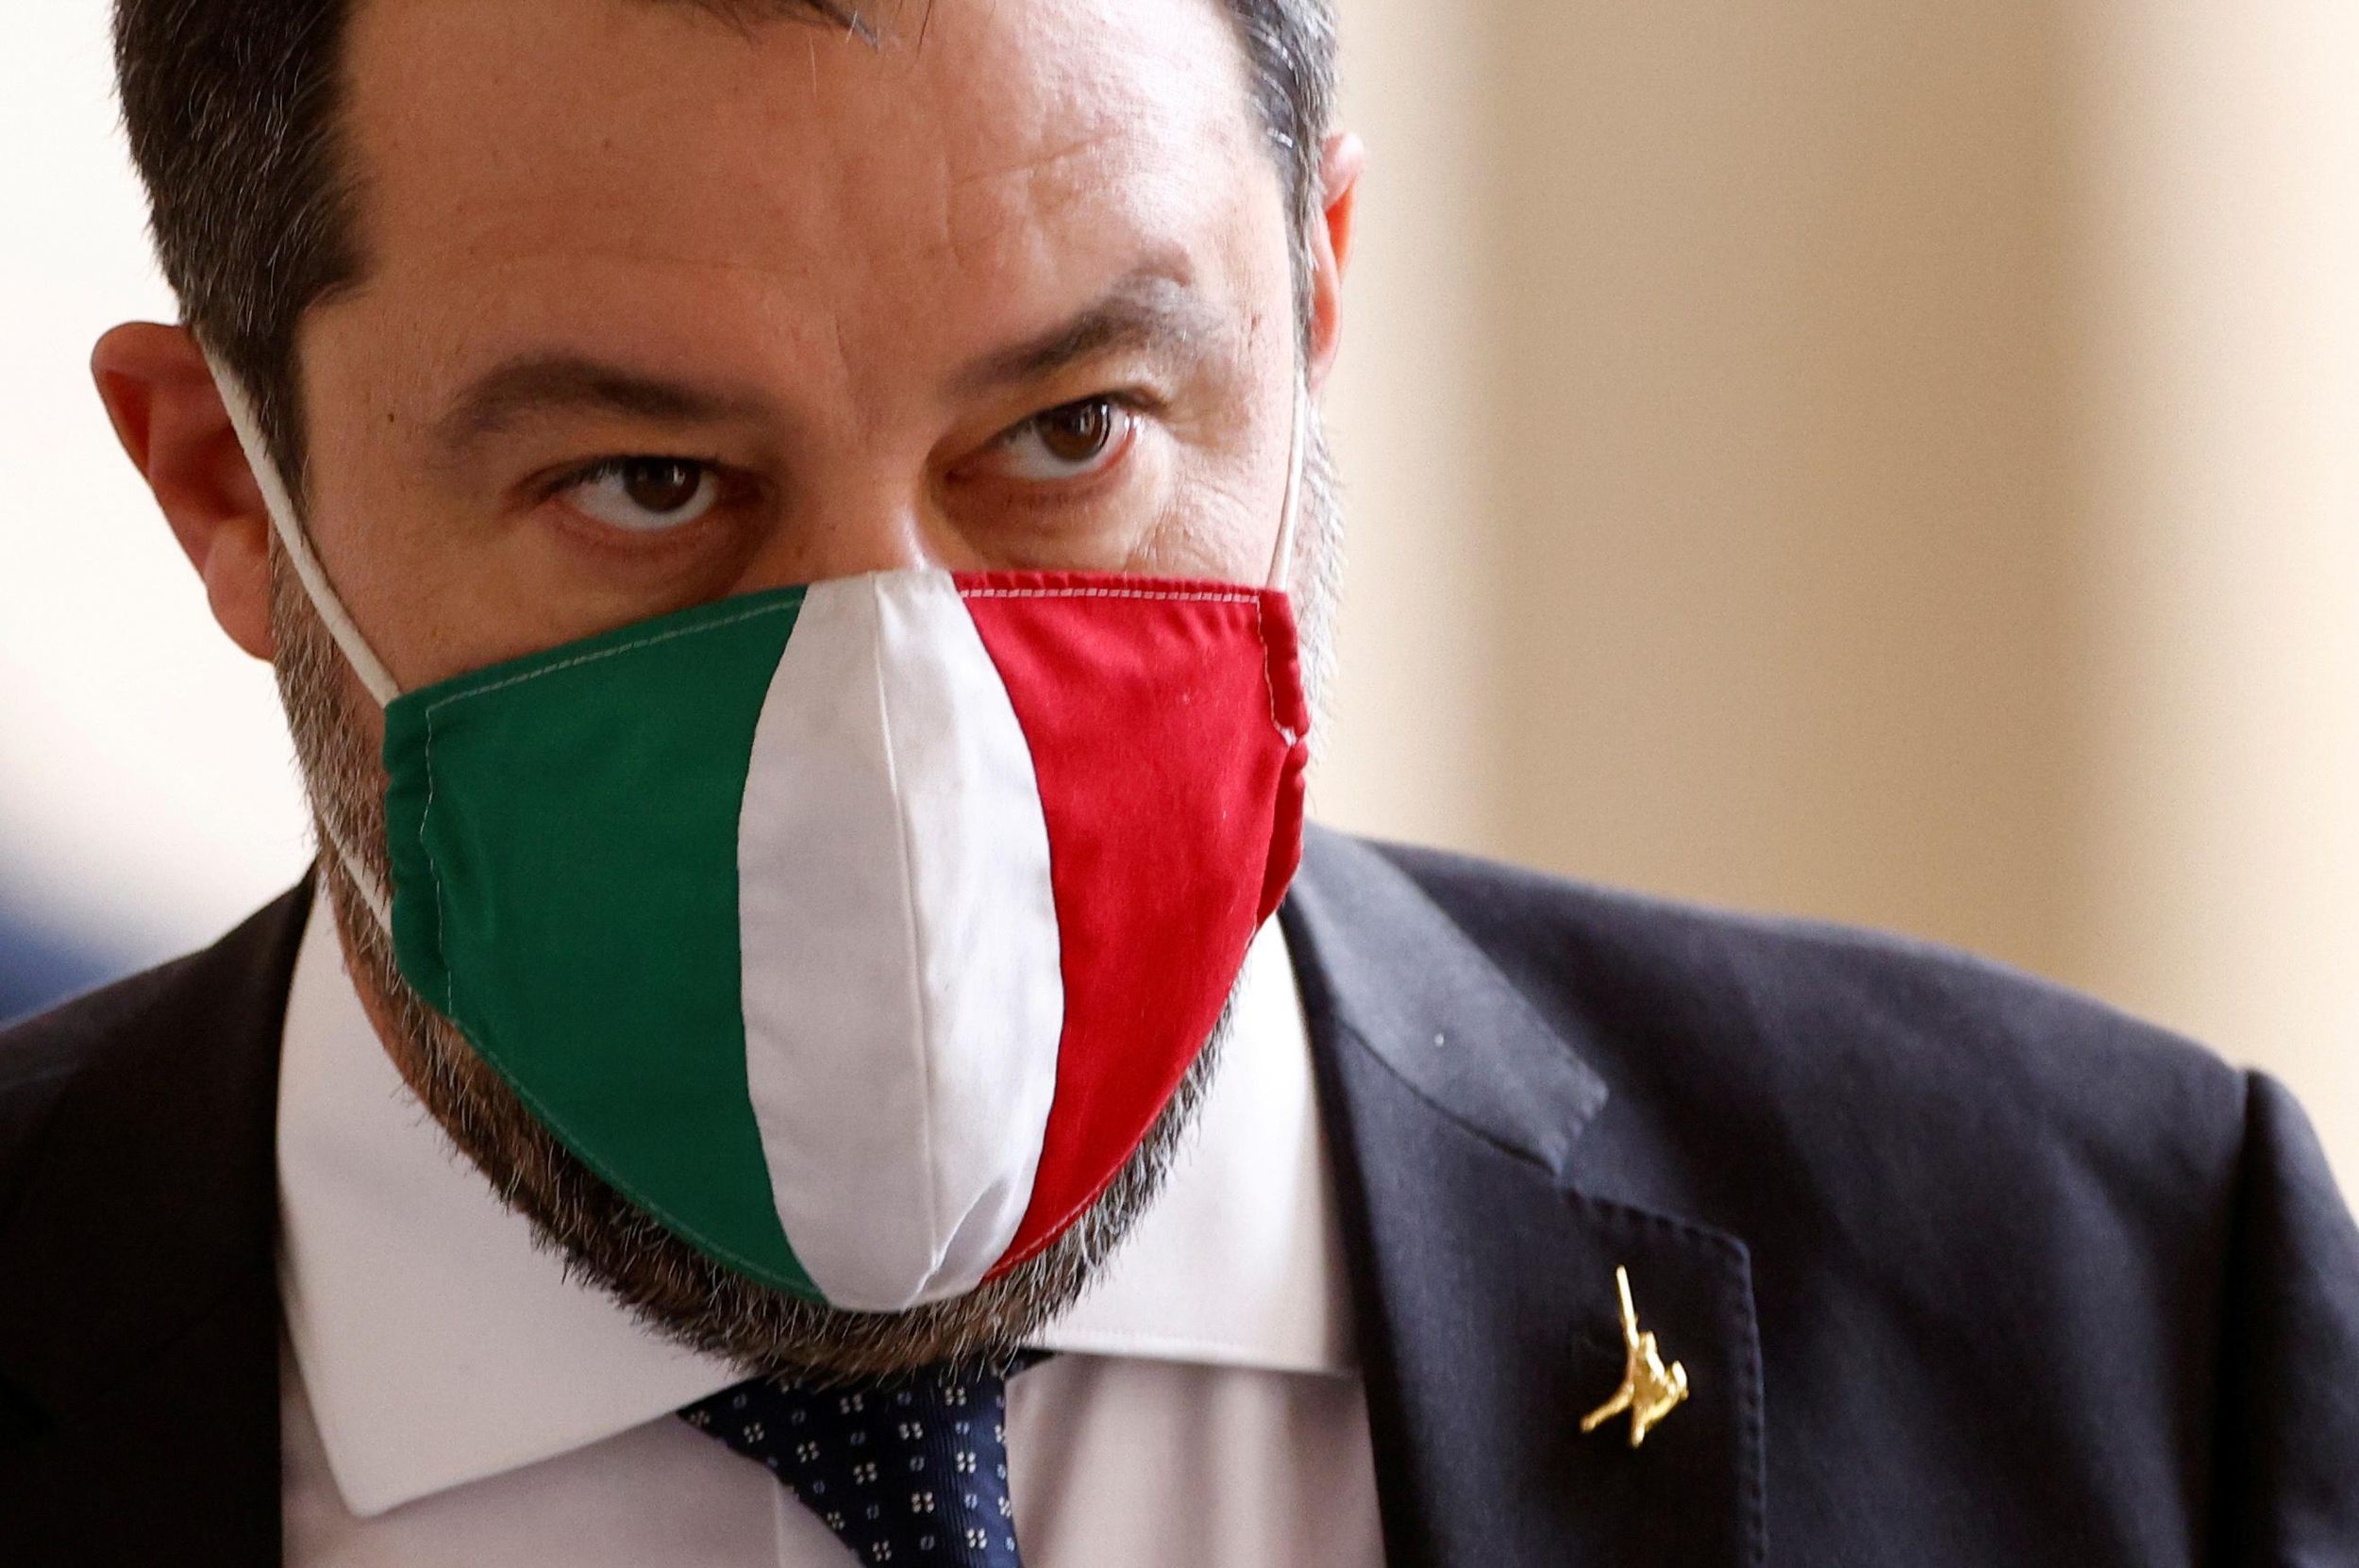  League party leader Matteo Salvini arrives for a meeting with Italian President Sergio Mattarella at the Quirinale Palace in Rome, Italy January 29, 2021.